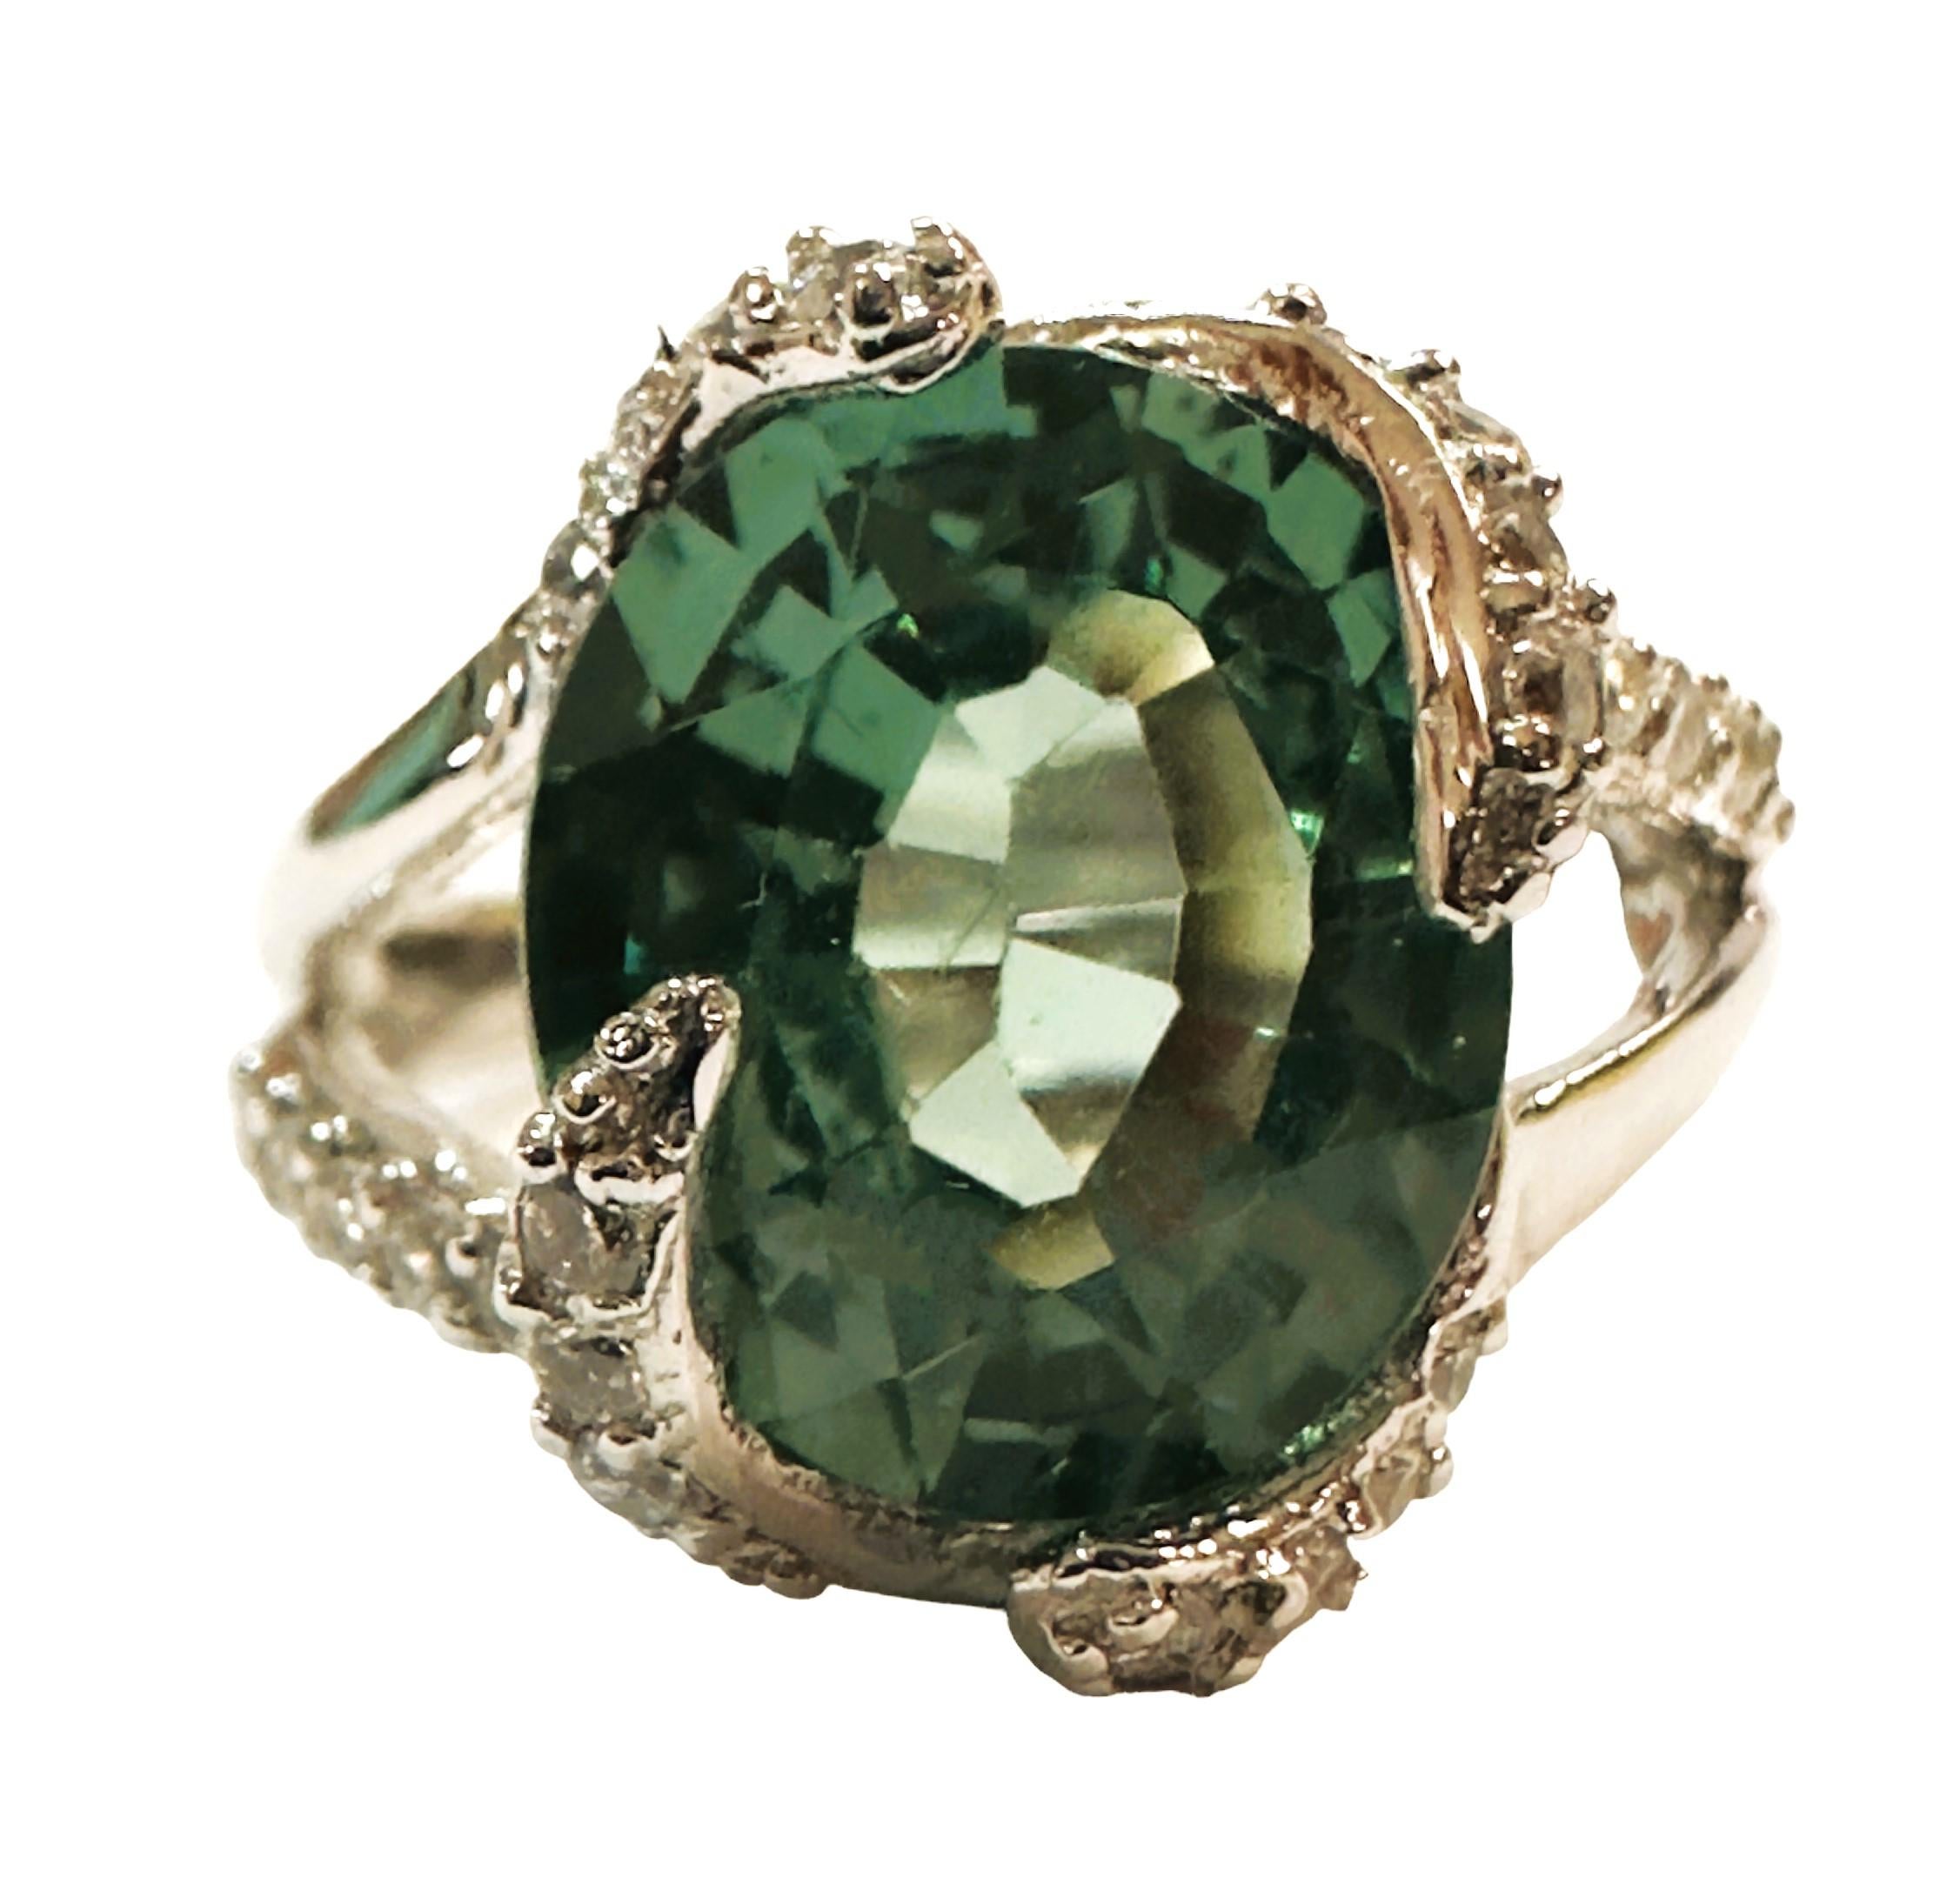 What a beautiful ring this is!.  I just love the design.  It is a size 6.5.  It is from Africa and is a very high quality stone.  The stone is an  oval cut stone and is 5.5 cts.   The main stone measures 12 x 10 mm and is surrounded by diamond cut